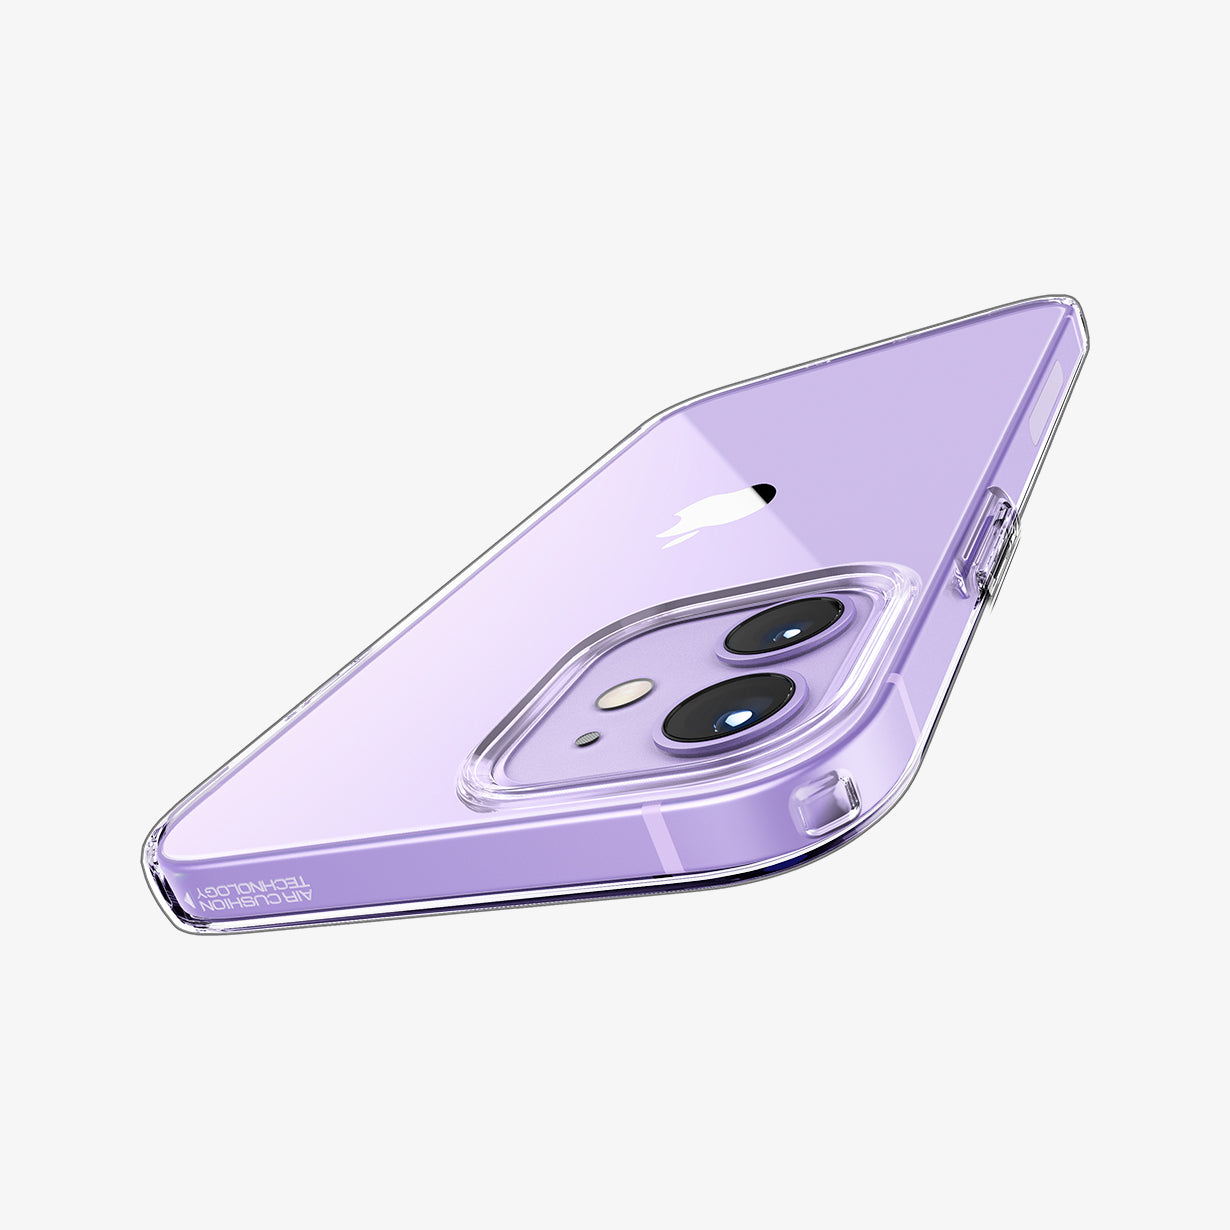 ACS01697 - iPhone 12 / 12 Pro Case Liquid Crystal in crystal clear showing the top, side and back